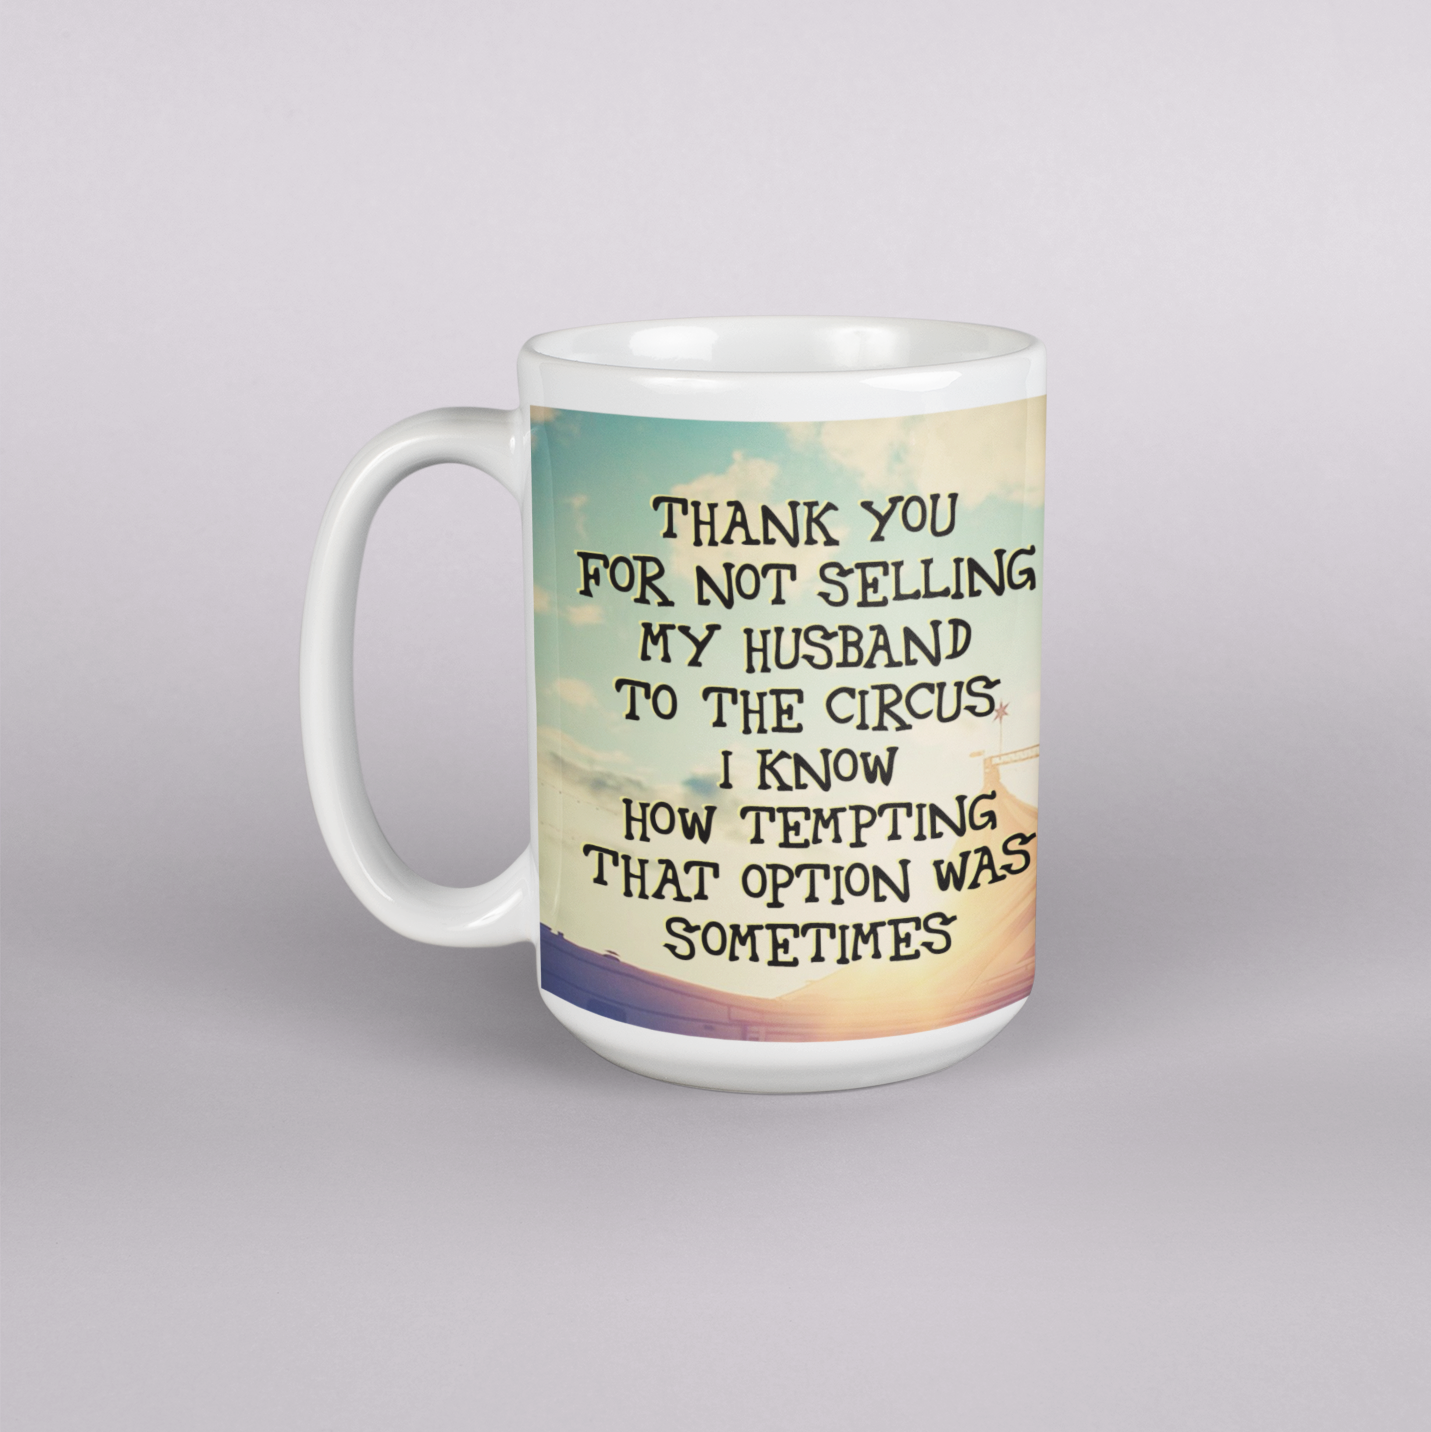 Thank You For Not Selling My (husband/wife) To The Circus Mug